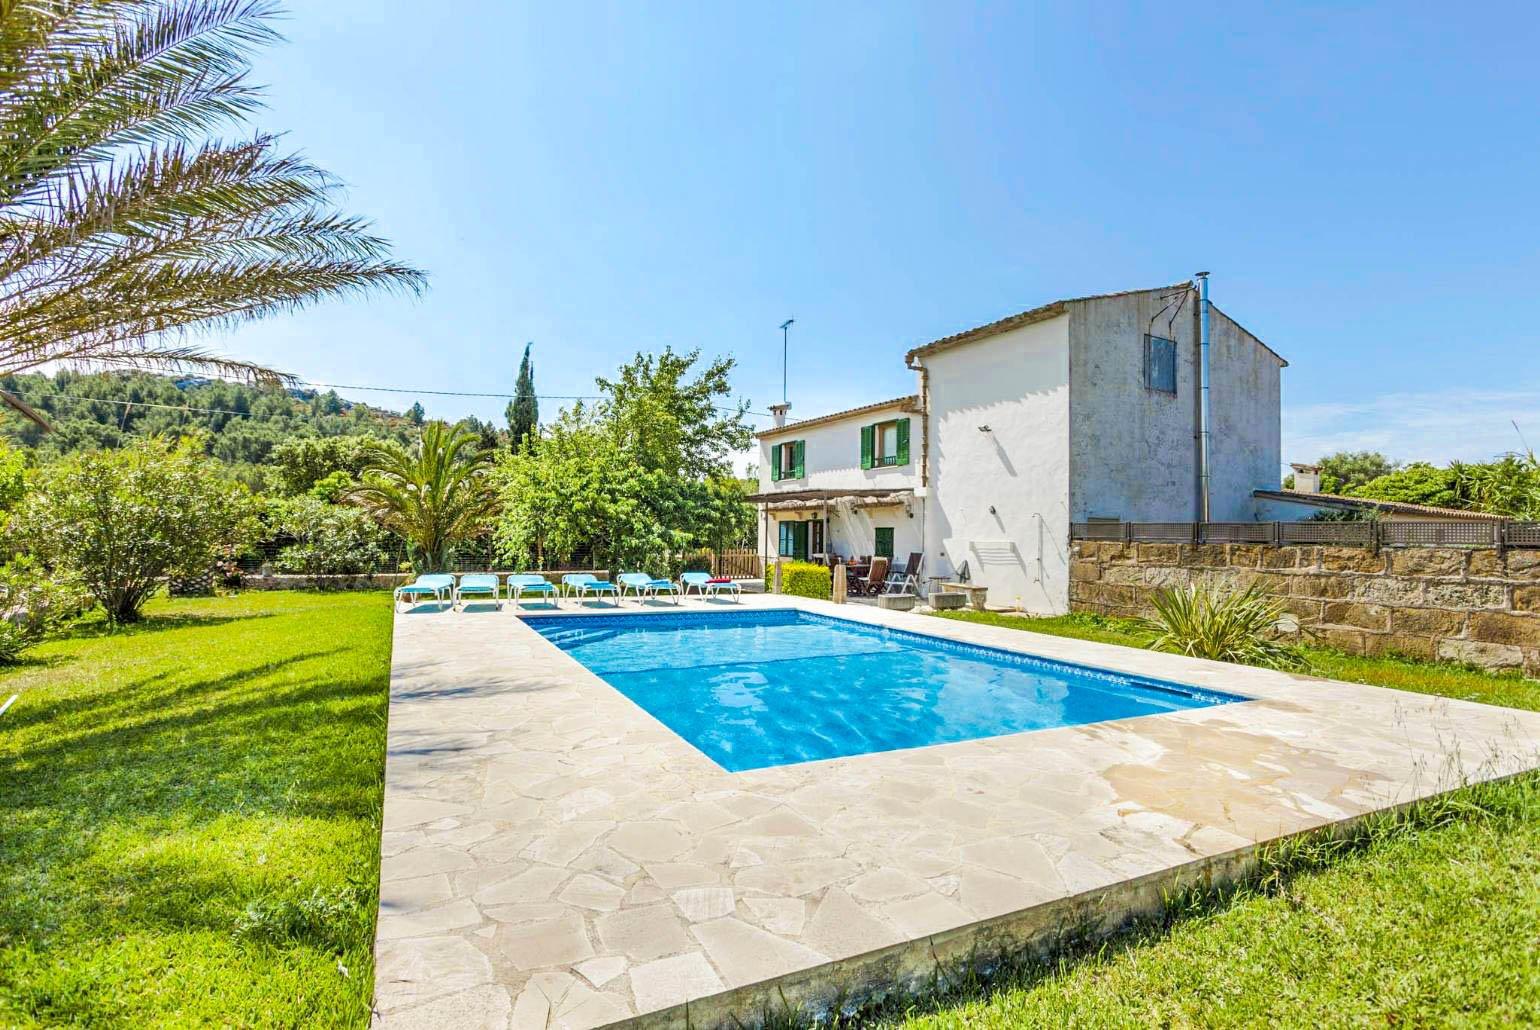 ,Beautiful villa with private pool, terrace and garden